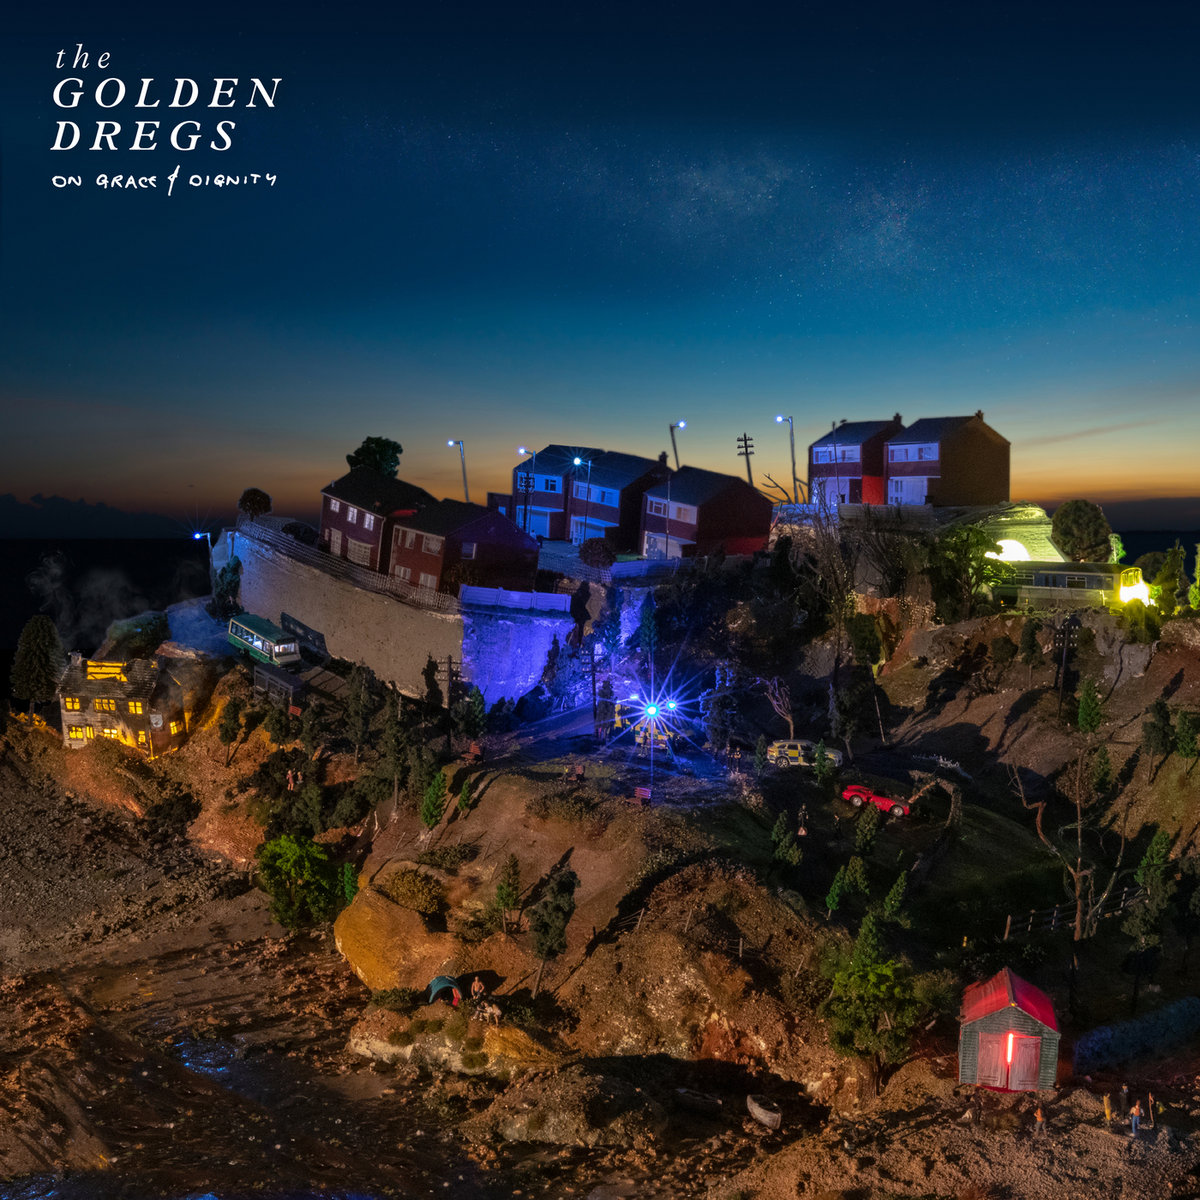 GOLDEN DREGS – ON GRACE & DIGNITY (LIMITED EDITION CLEAR VINYL) – LP